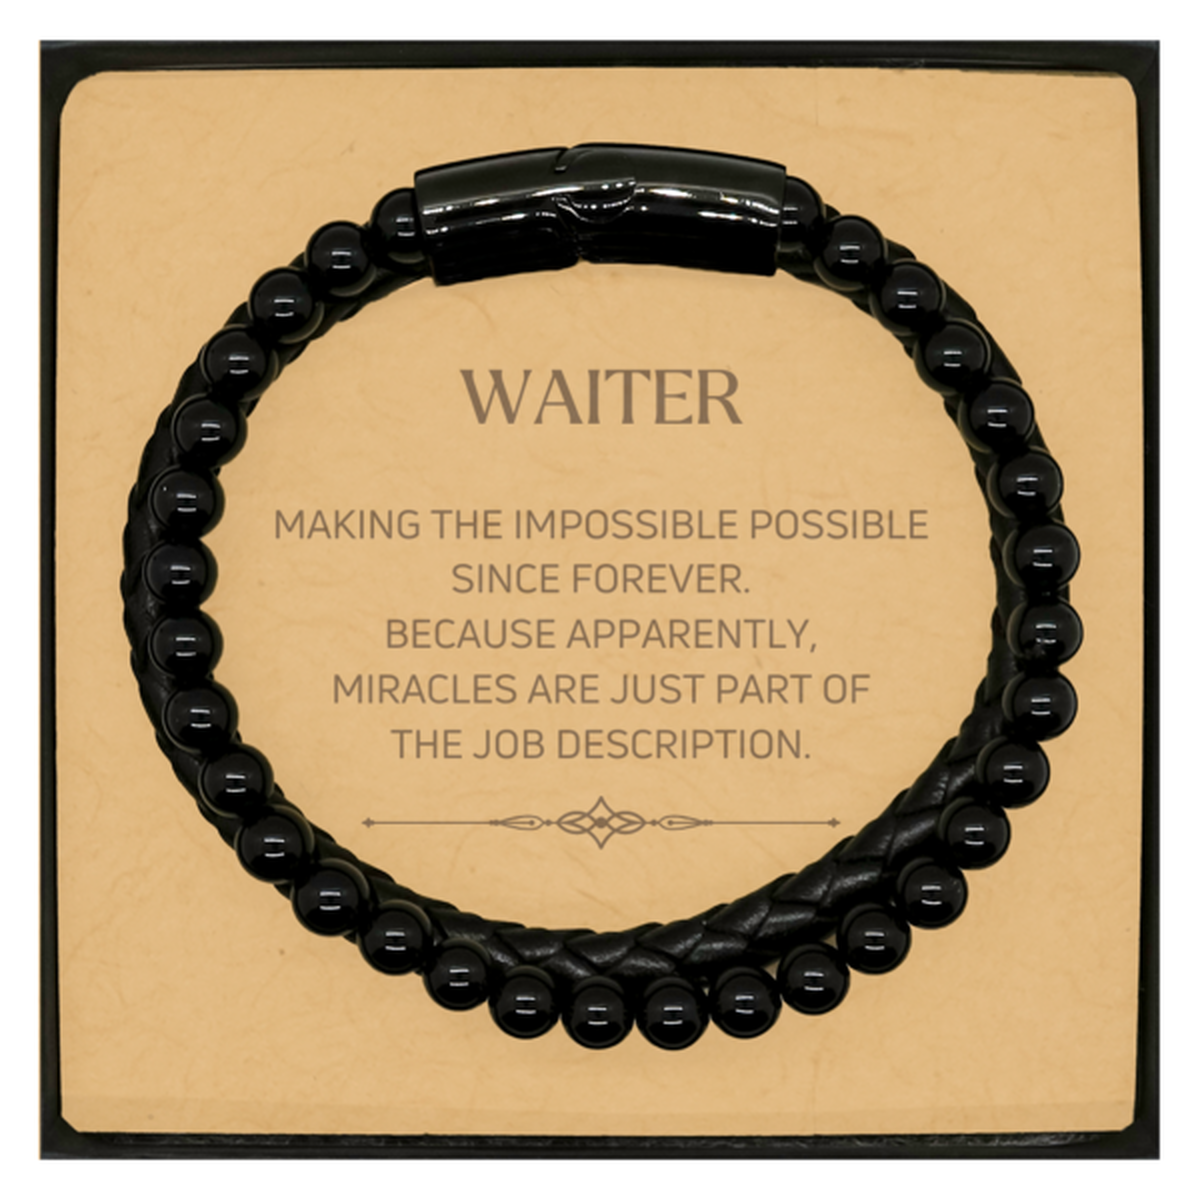 Funny Waiter Gifts, Miracles are just part of the job description, Inspirational Birthday Christmas Stone Leather Bracelets For Waiter, Men, Women, Coworkers, Friends, Boss